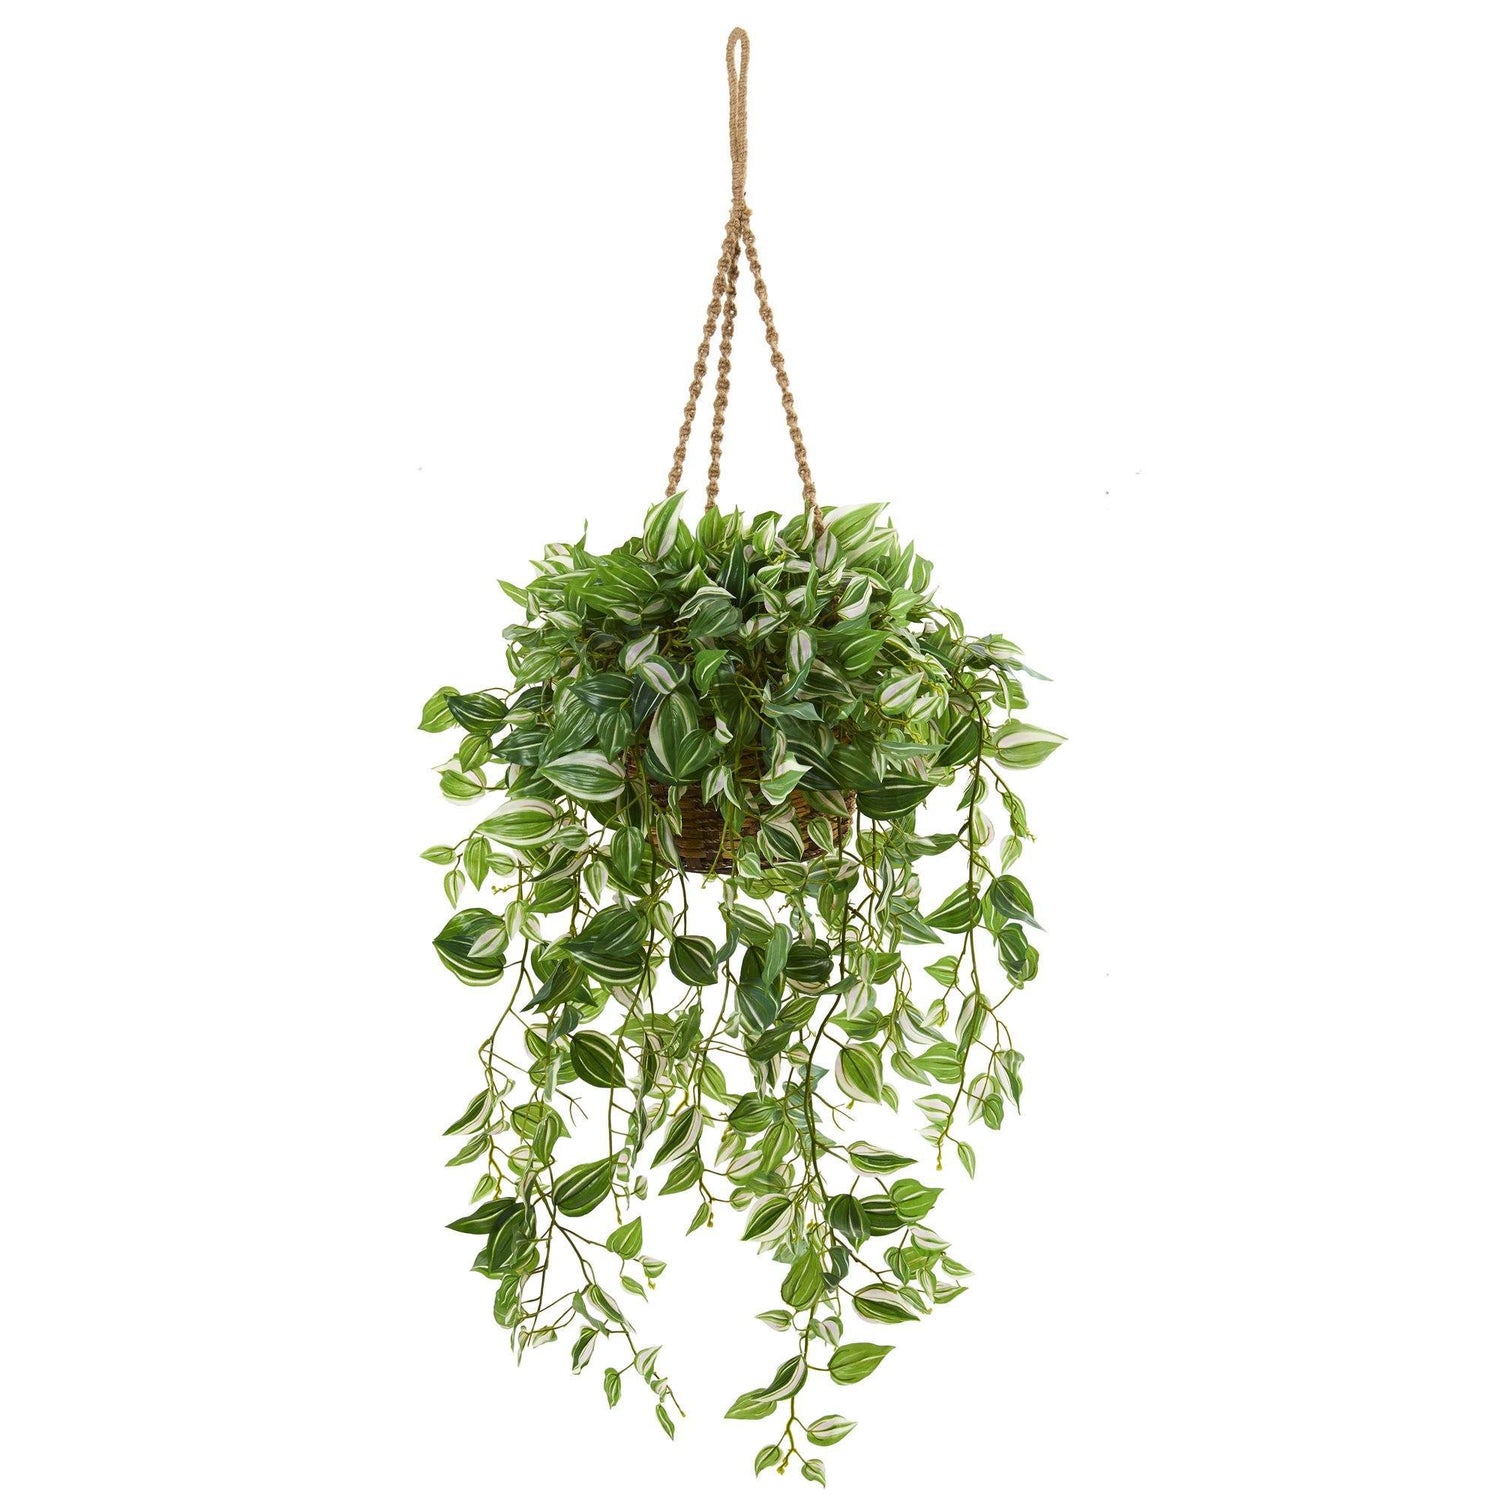 51” Wandering Jew Artificial Plant in Hanging Basket (Real Touch)